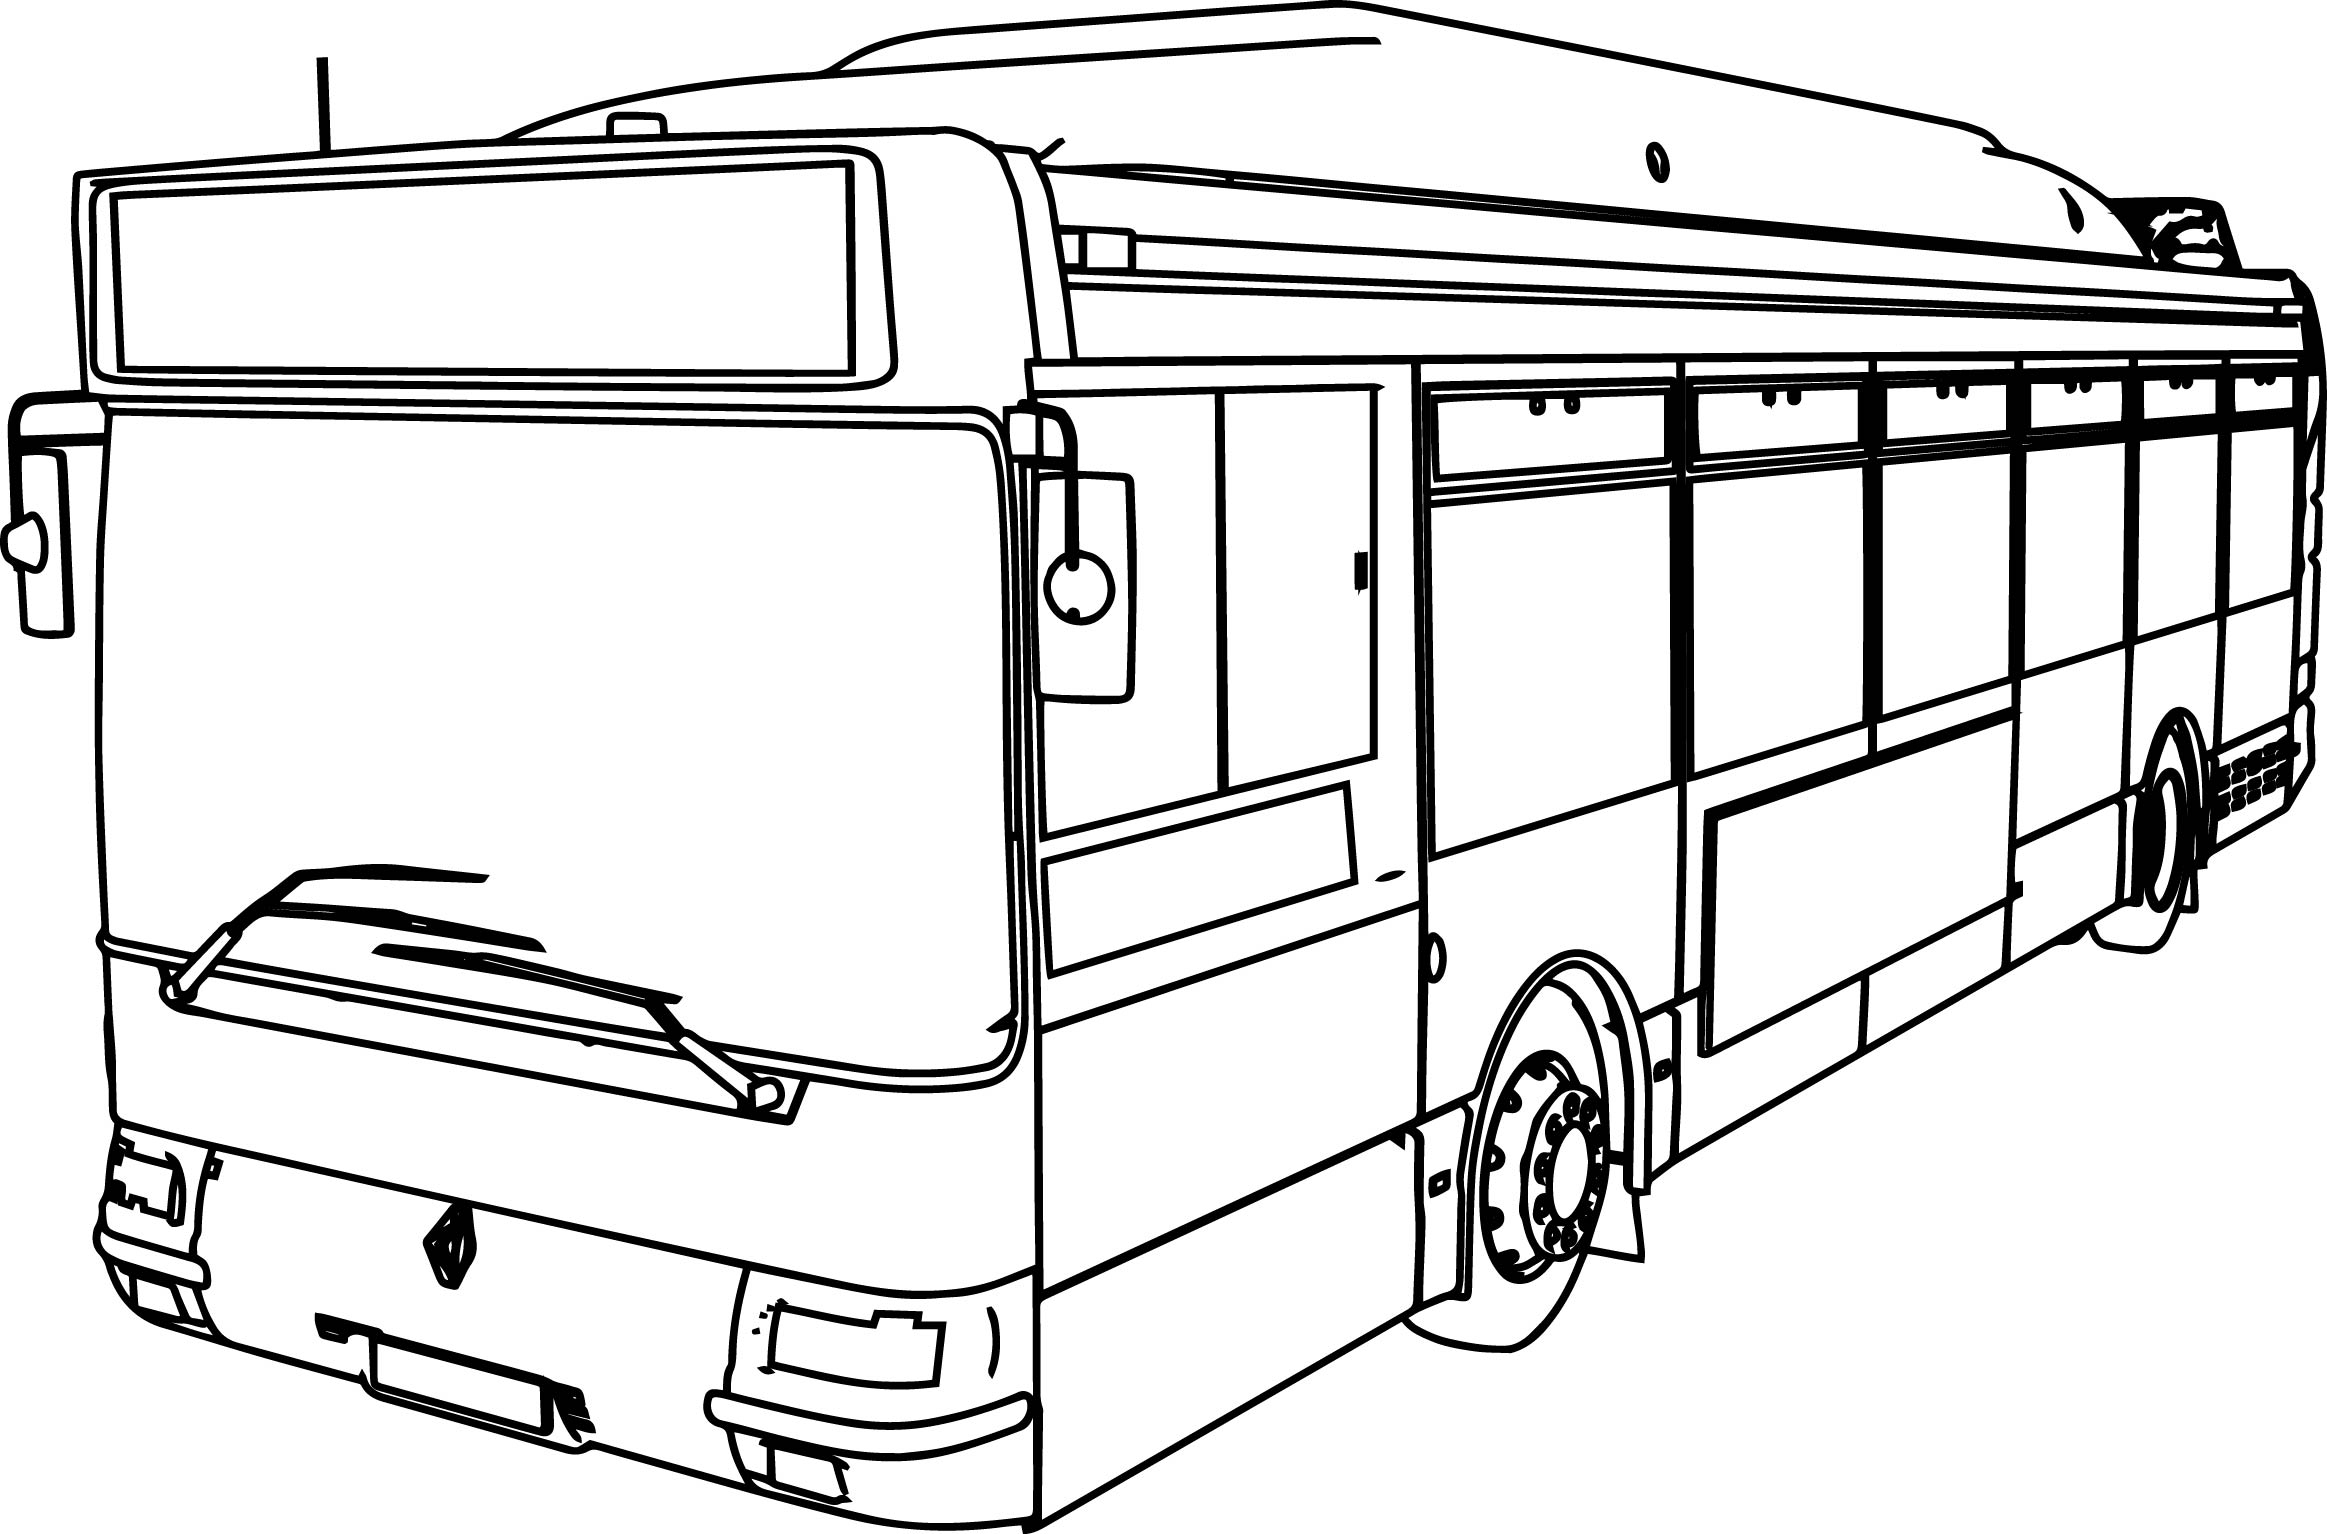 School Bus Coloring Page School Bus Coloring Page At Getdrawings Free For Personal Use